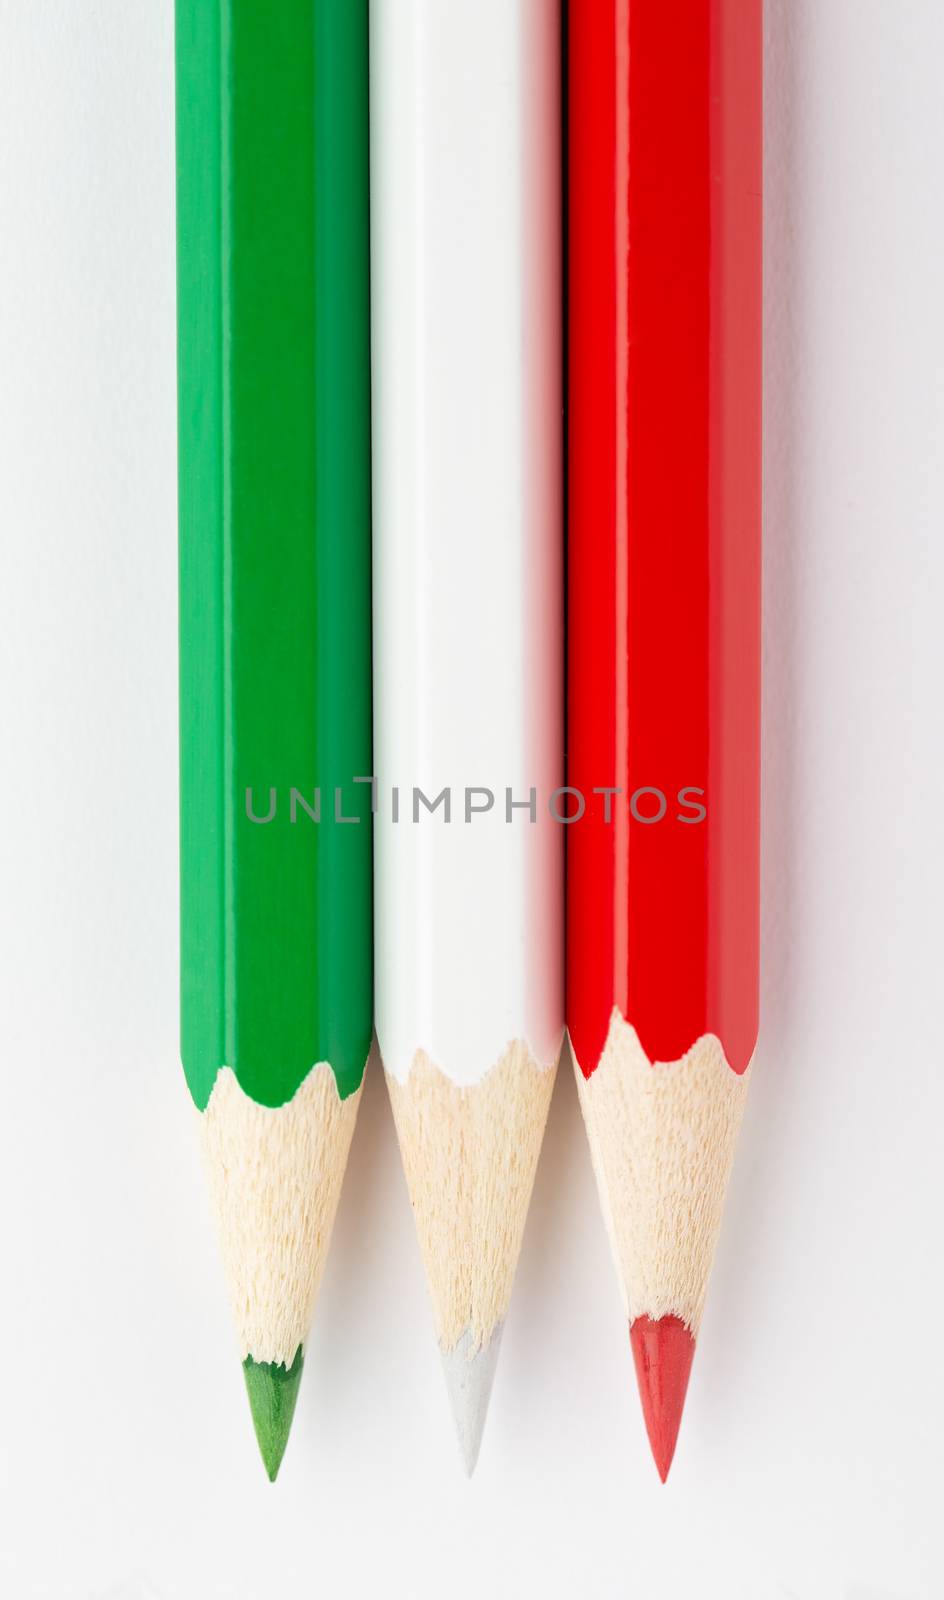 State flags made of colorful wooden pencils Italy by 25ehaag6